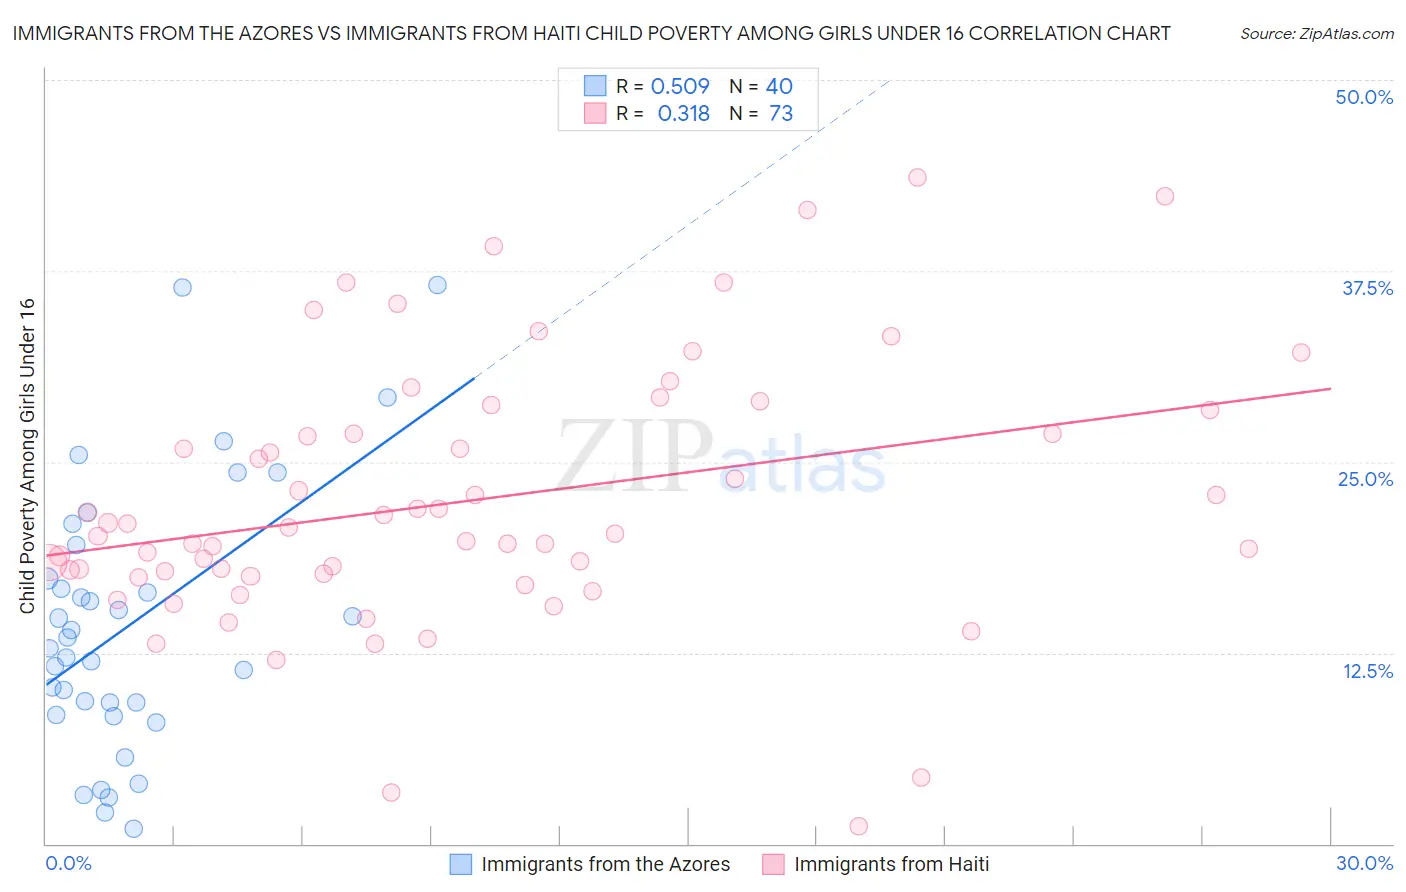 Immigrants from the Azores vs Immigrants from Haiti Child Poverty Among Girls Under 16